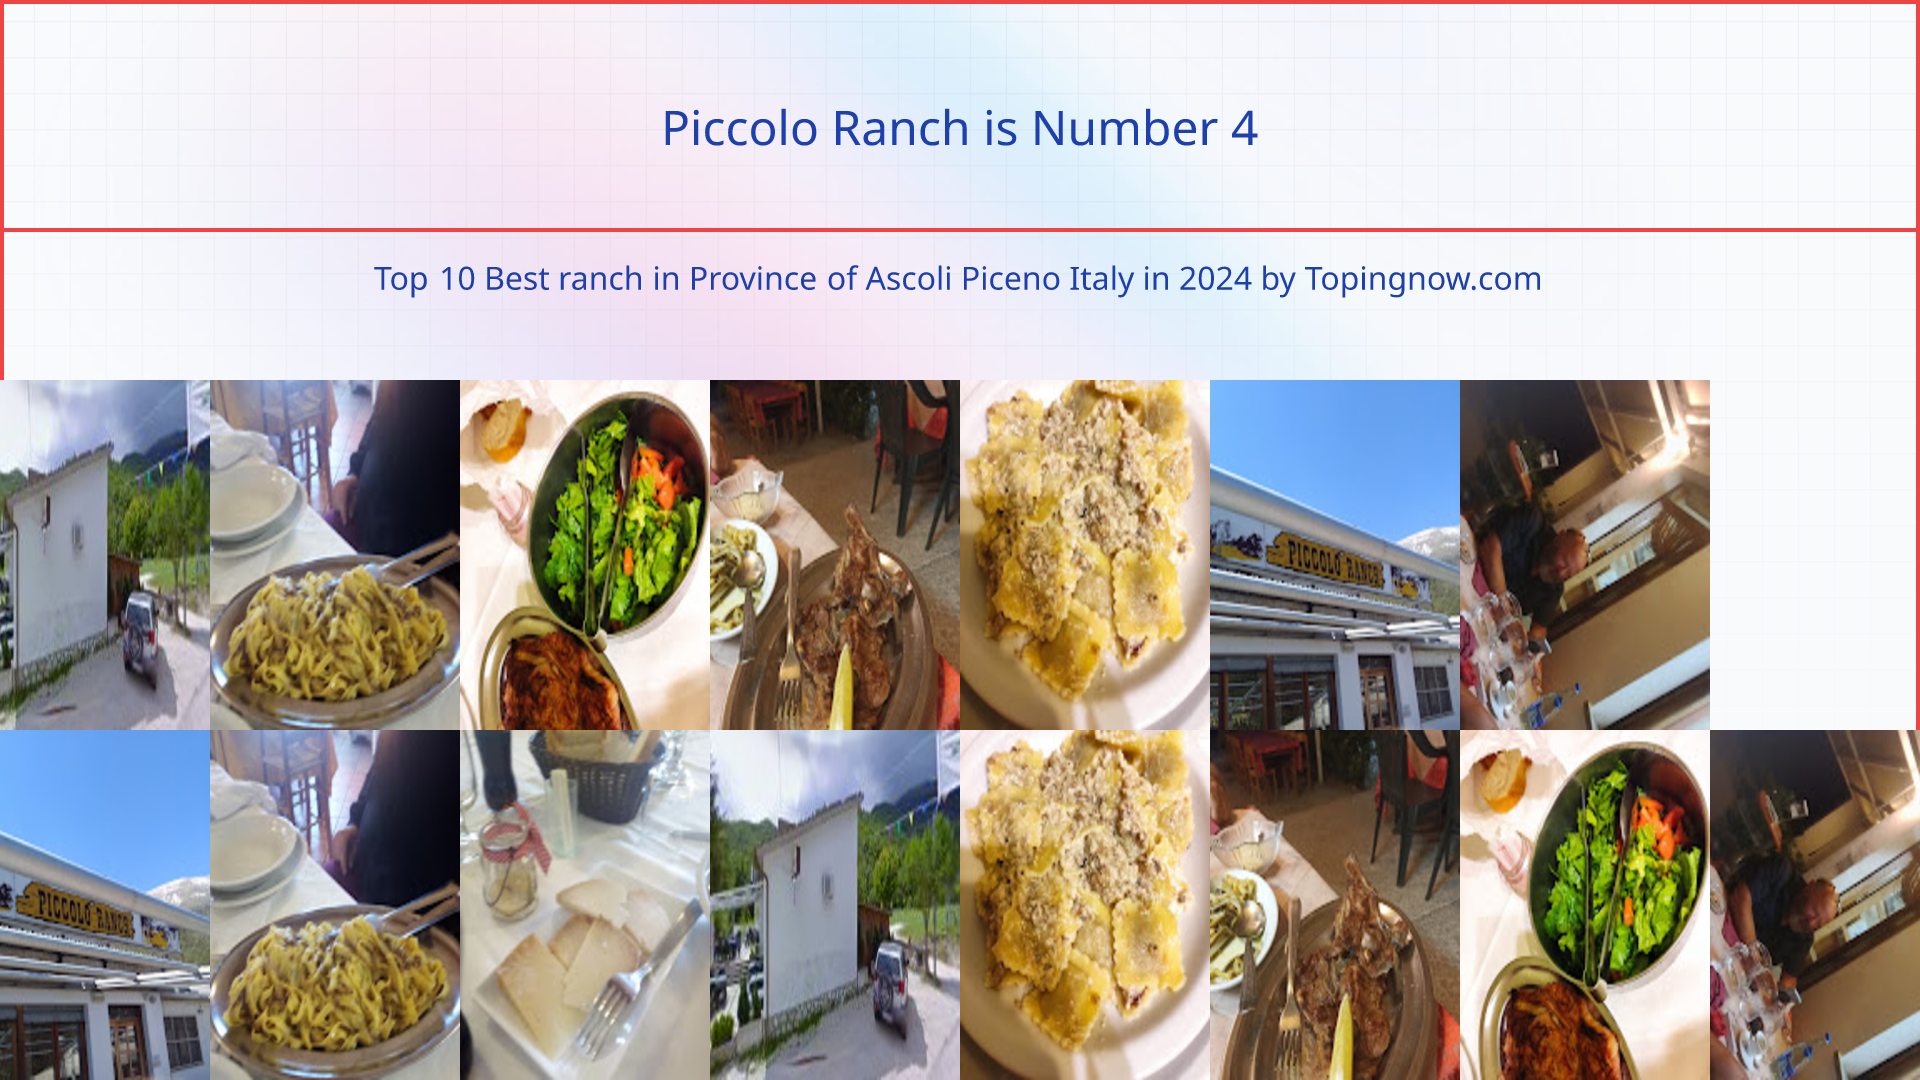 Piccolo Ranch: Top 10 Best ranch in Province of Ascoli Piceno Italy in 2024